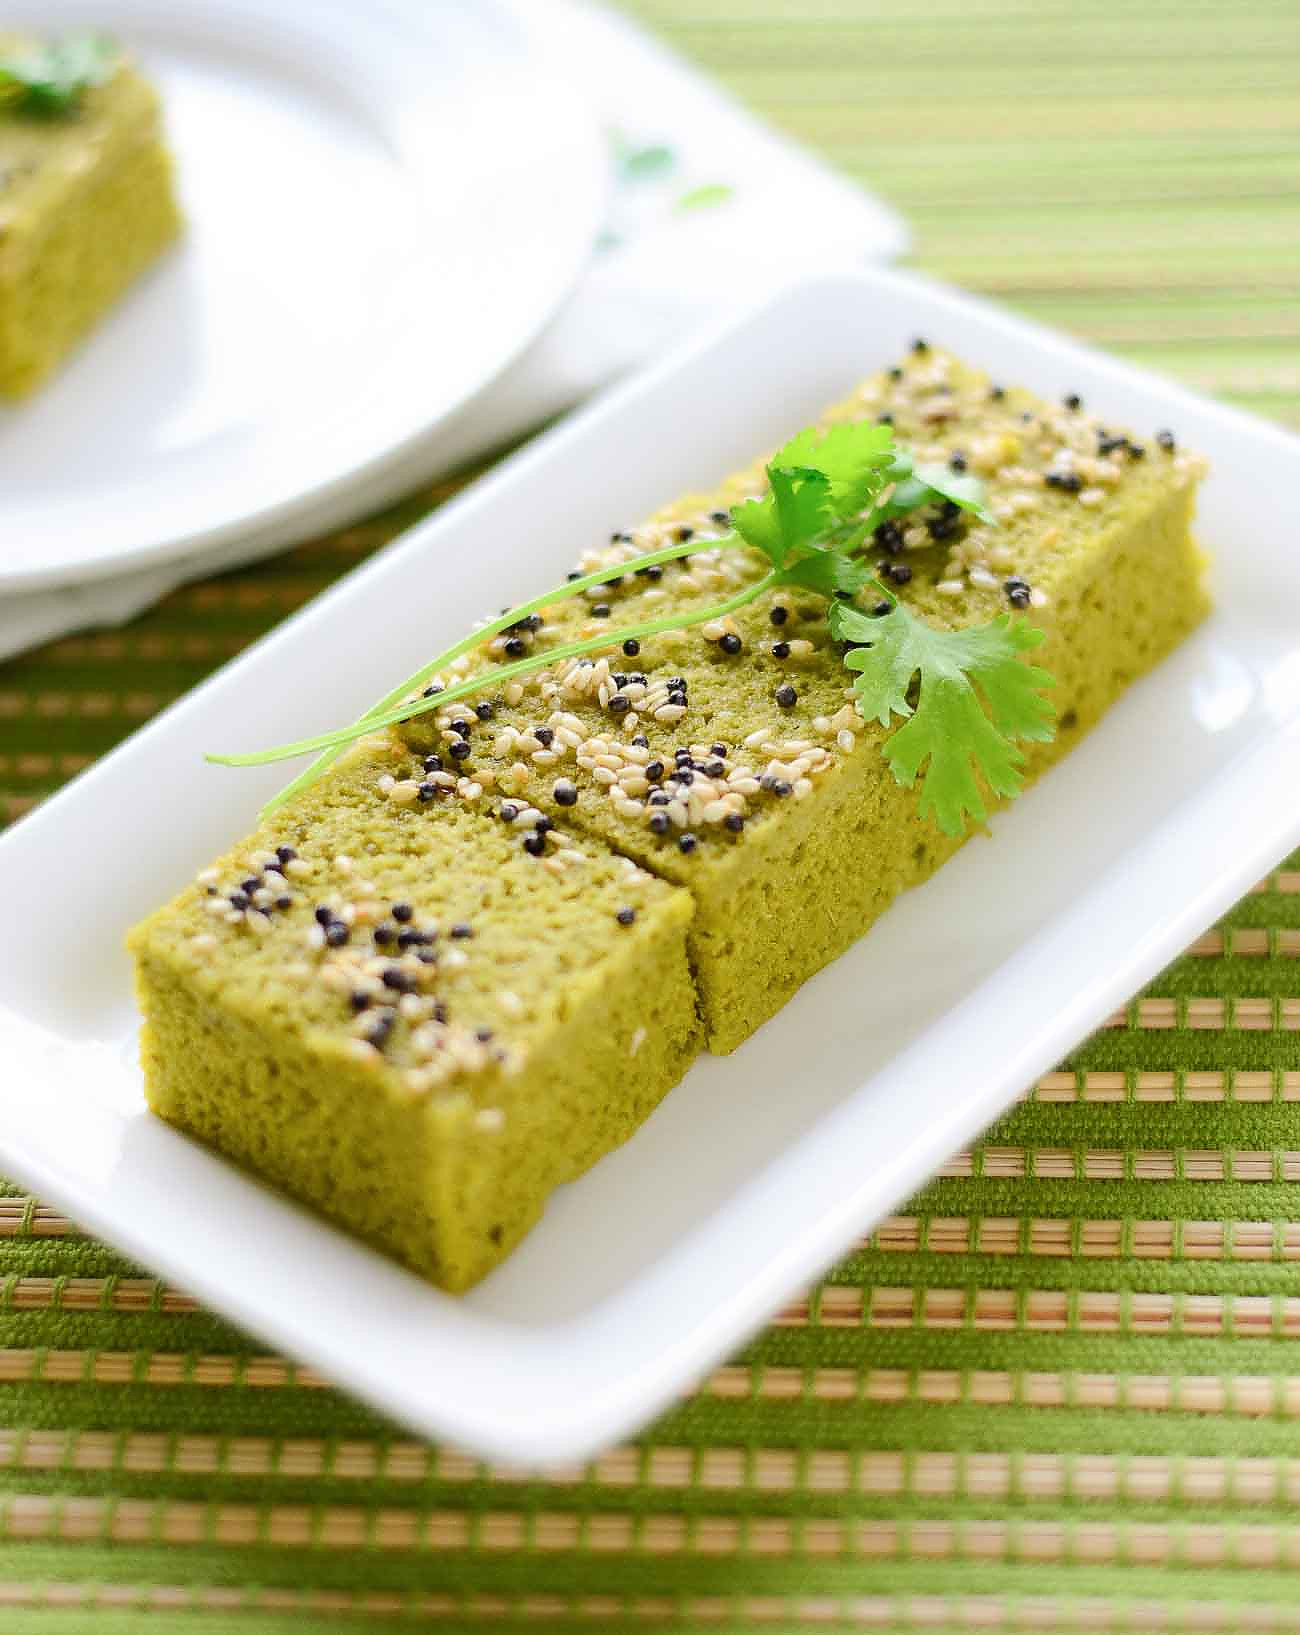 Gujarati Palak Dhokla Recipe - Steamed Spinach Lentil Cakes